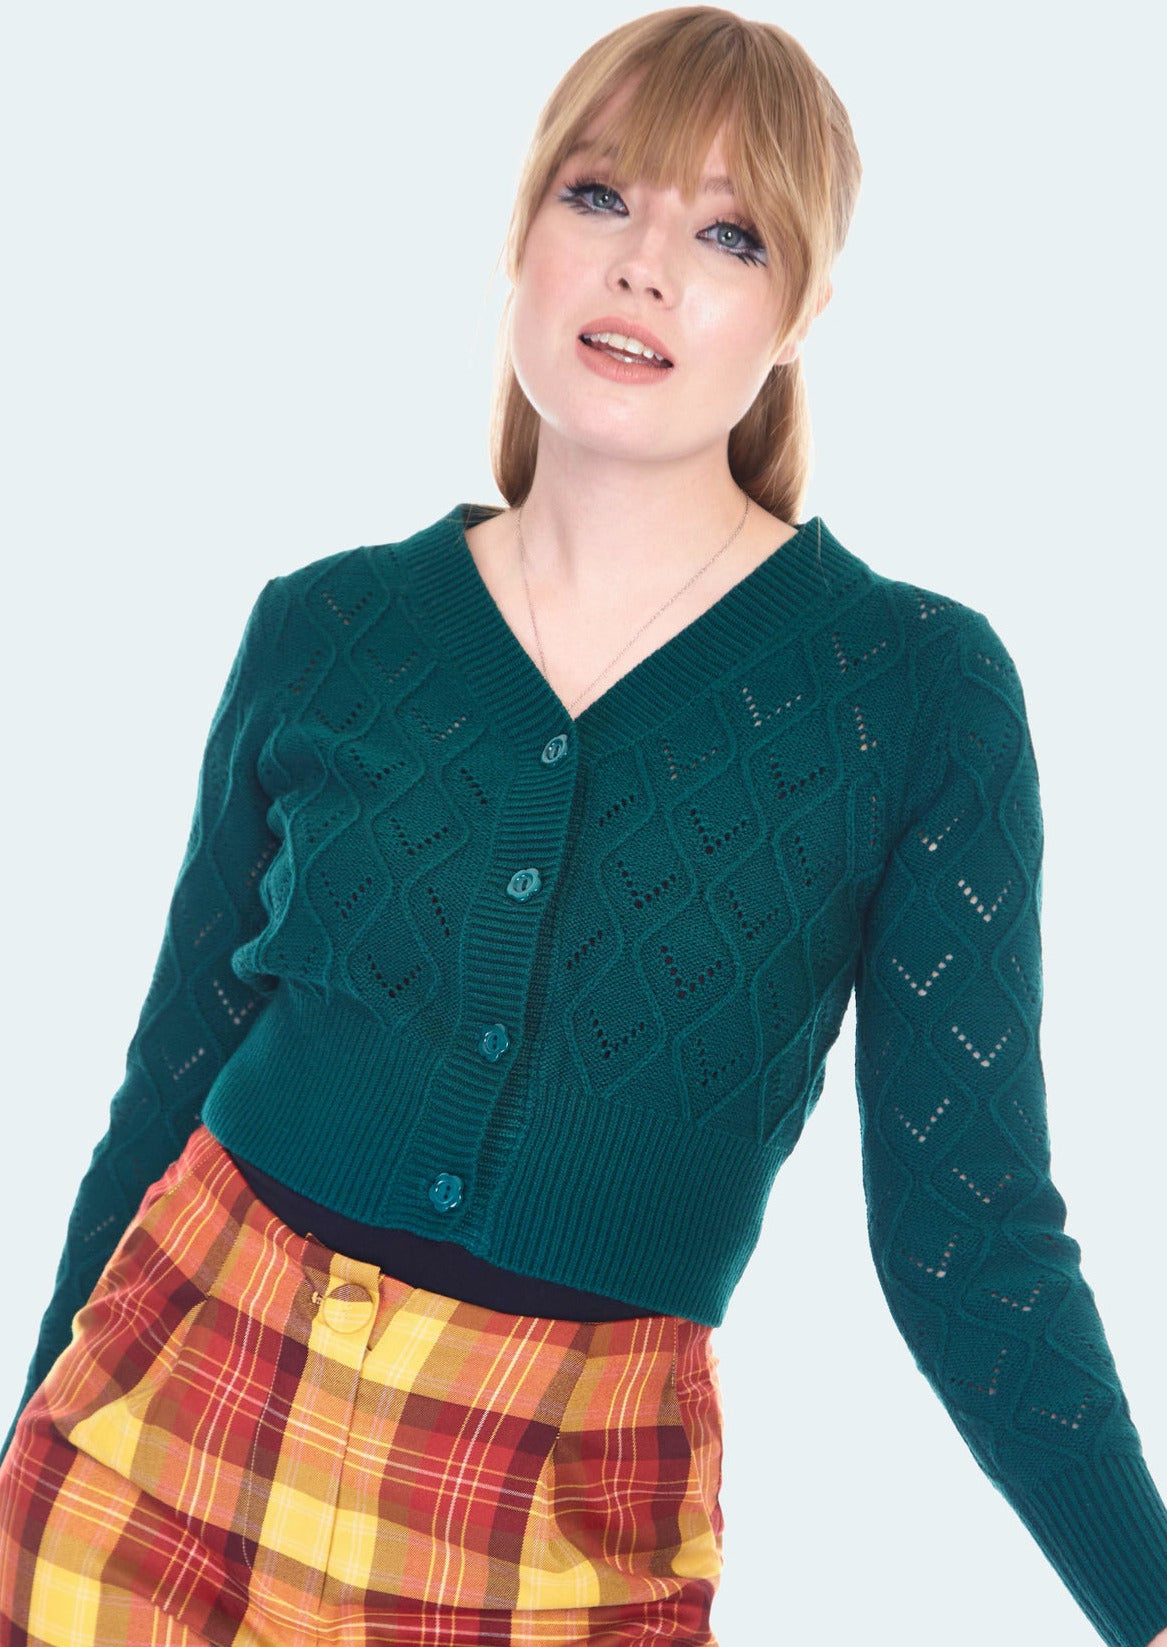 A model wearing a dark teal knit-in openwork cardigan with matching dark teal flower shaped buttons. It is slightly cropped and has a shallow v-neck